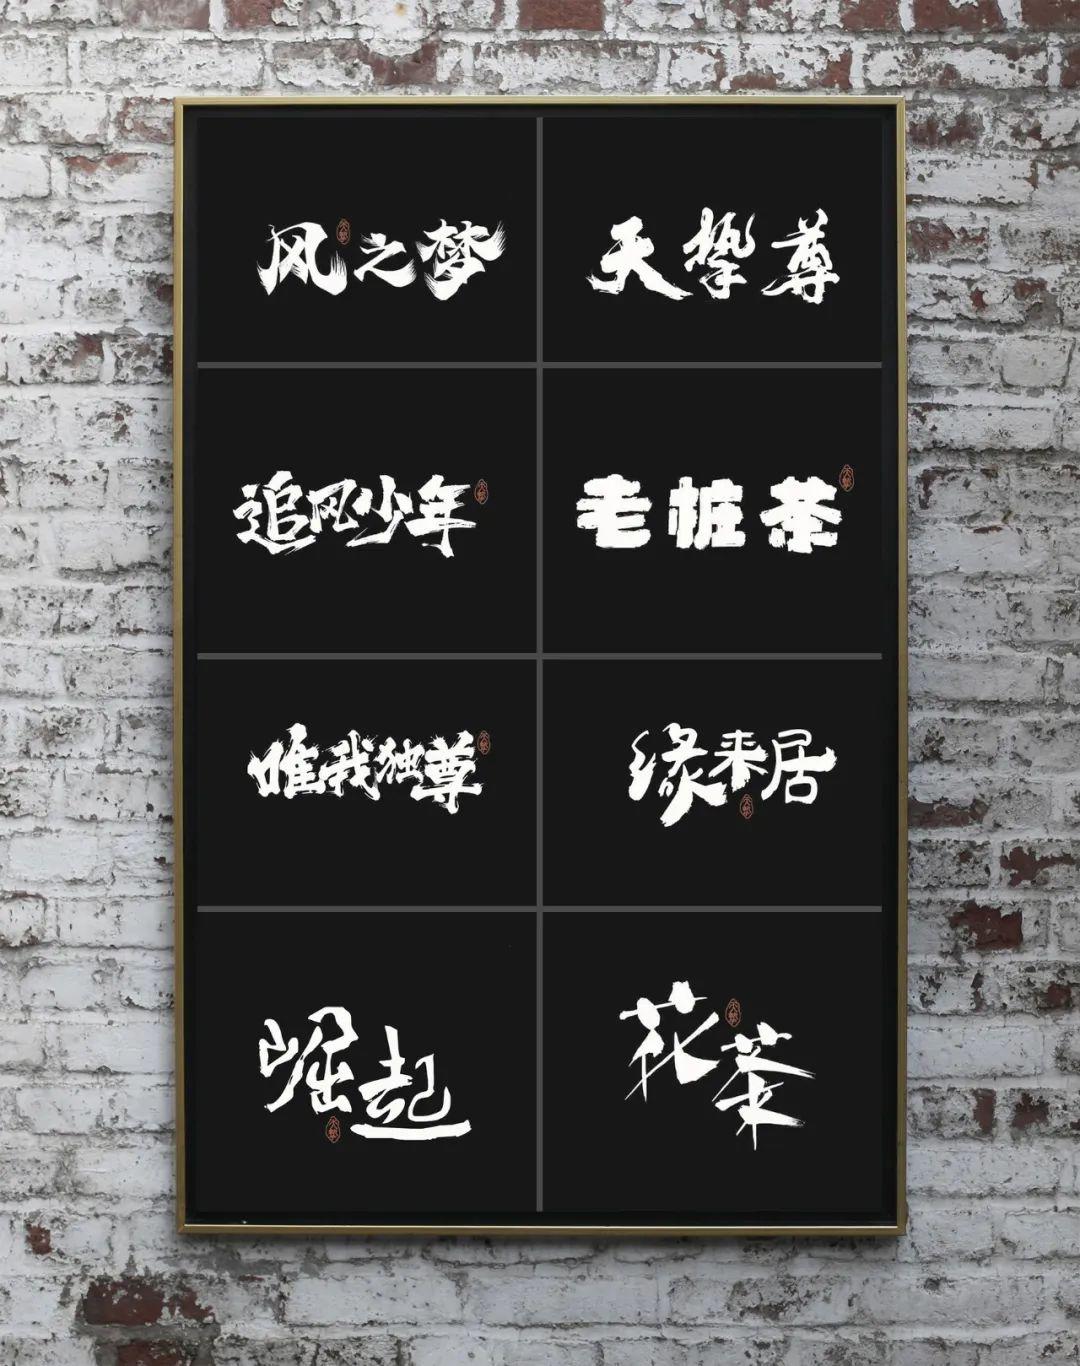 500 ancient calligraphy art fonts! The national trend is beautiful!